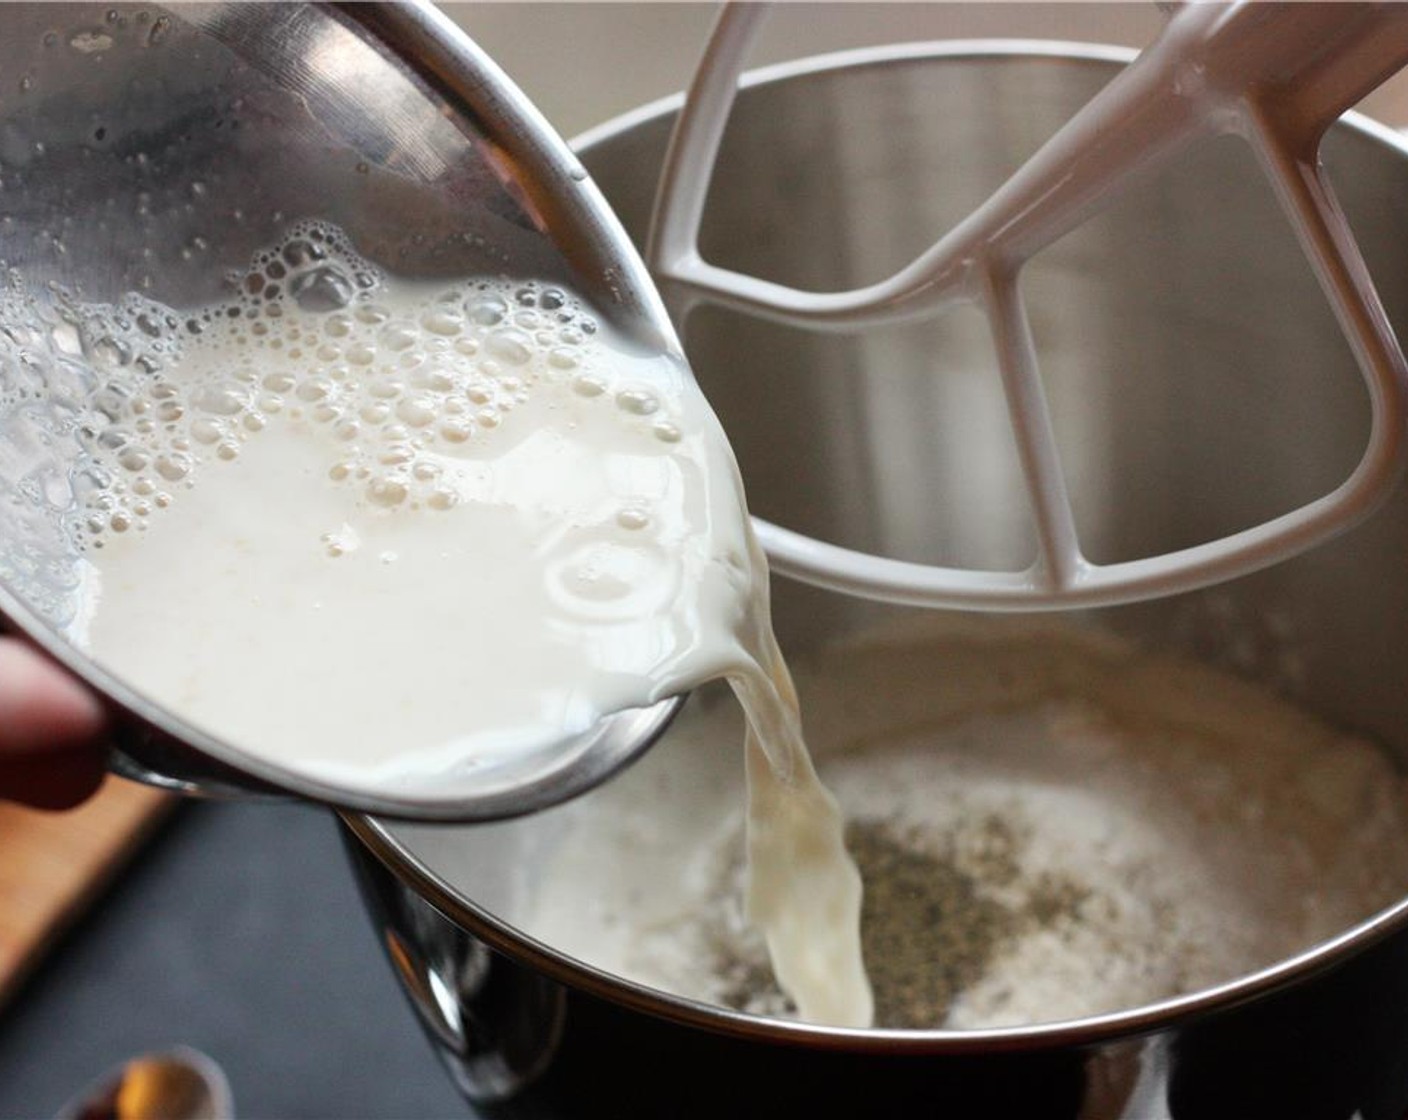 step 2 In a separate bowl, whisk together the Instant Dry Yeast (1/2 Tbsp) and Milk (1 cup) until yeast is dissolved. Add the yeast mixture and Butter (1/4 cup) to the mixer bowl and mix with a wooden spoon until loosely combined.